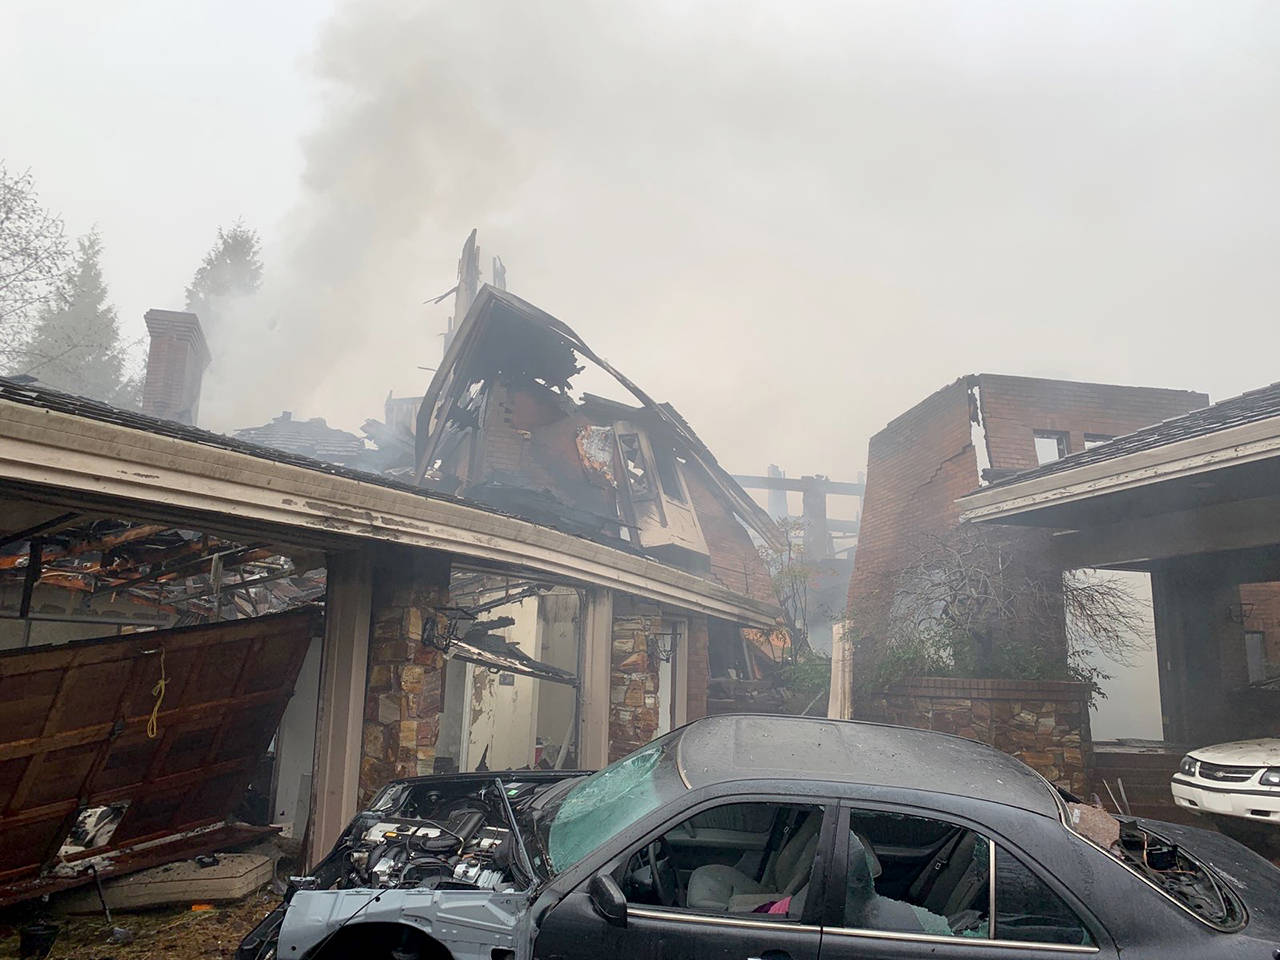 Crews were still working Thursday on the fire that collapsed a vacant 14,000-square-foot house on Fisher Road in Edmonds. (South County Fire)